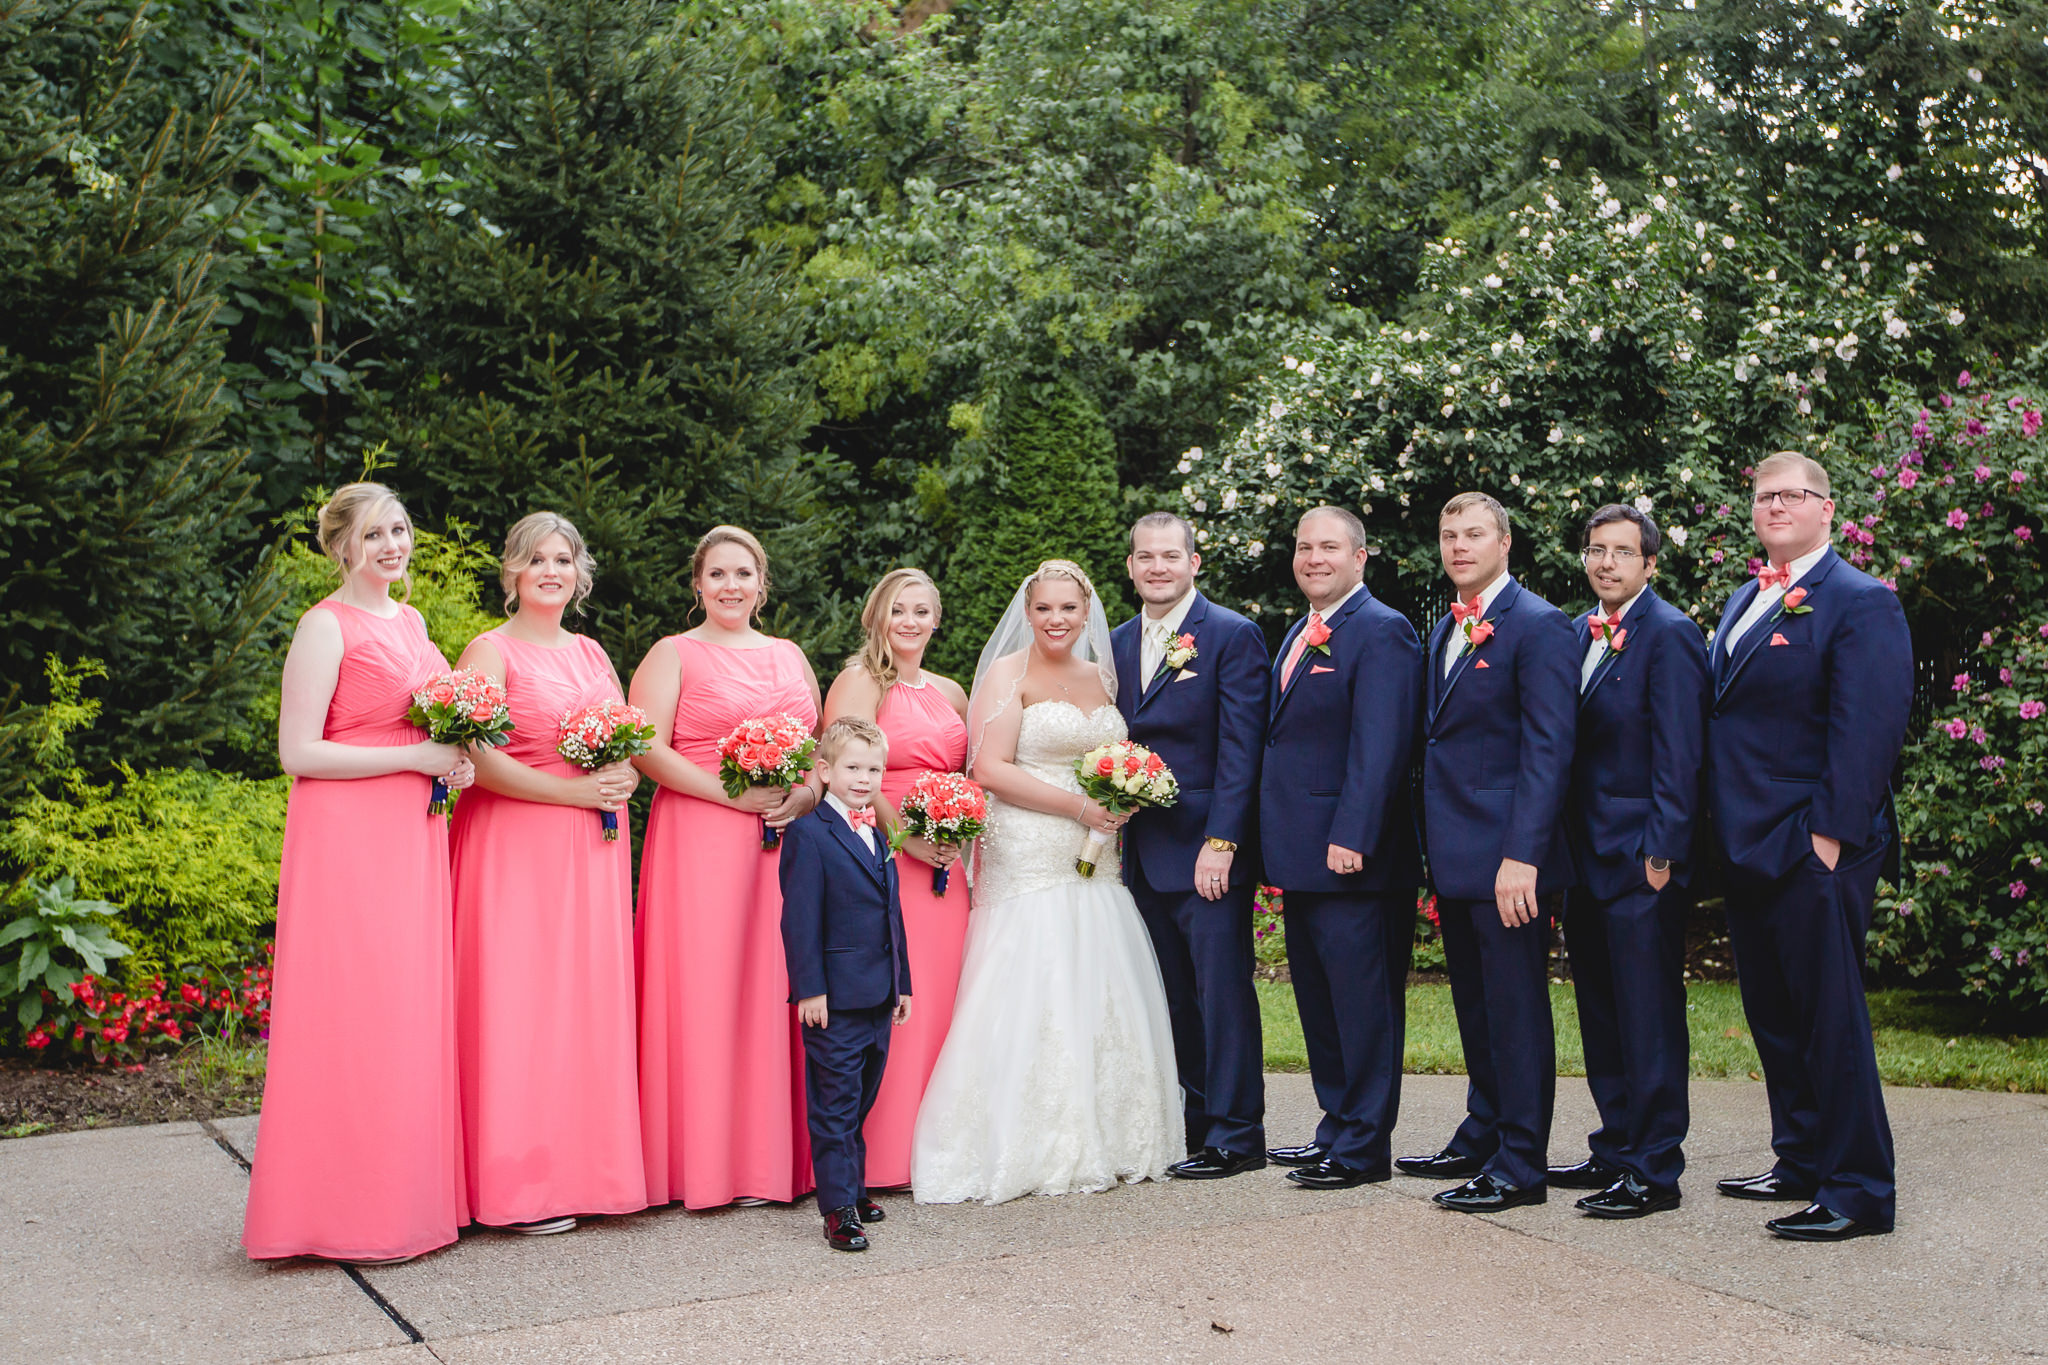 Bridal party poses in the courtyard of the Pittsburgh Airport Marriott